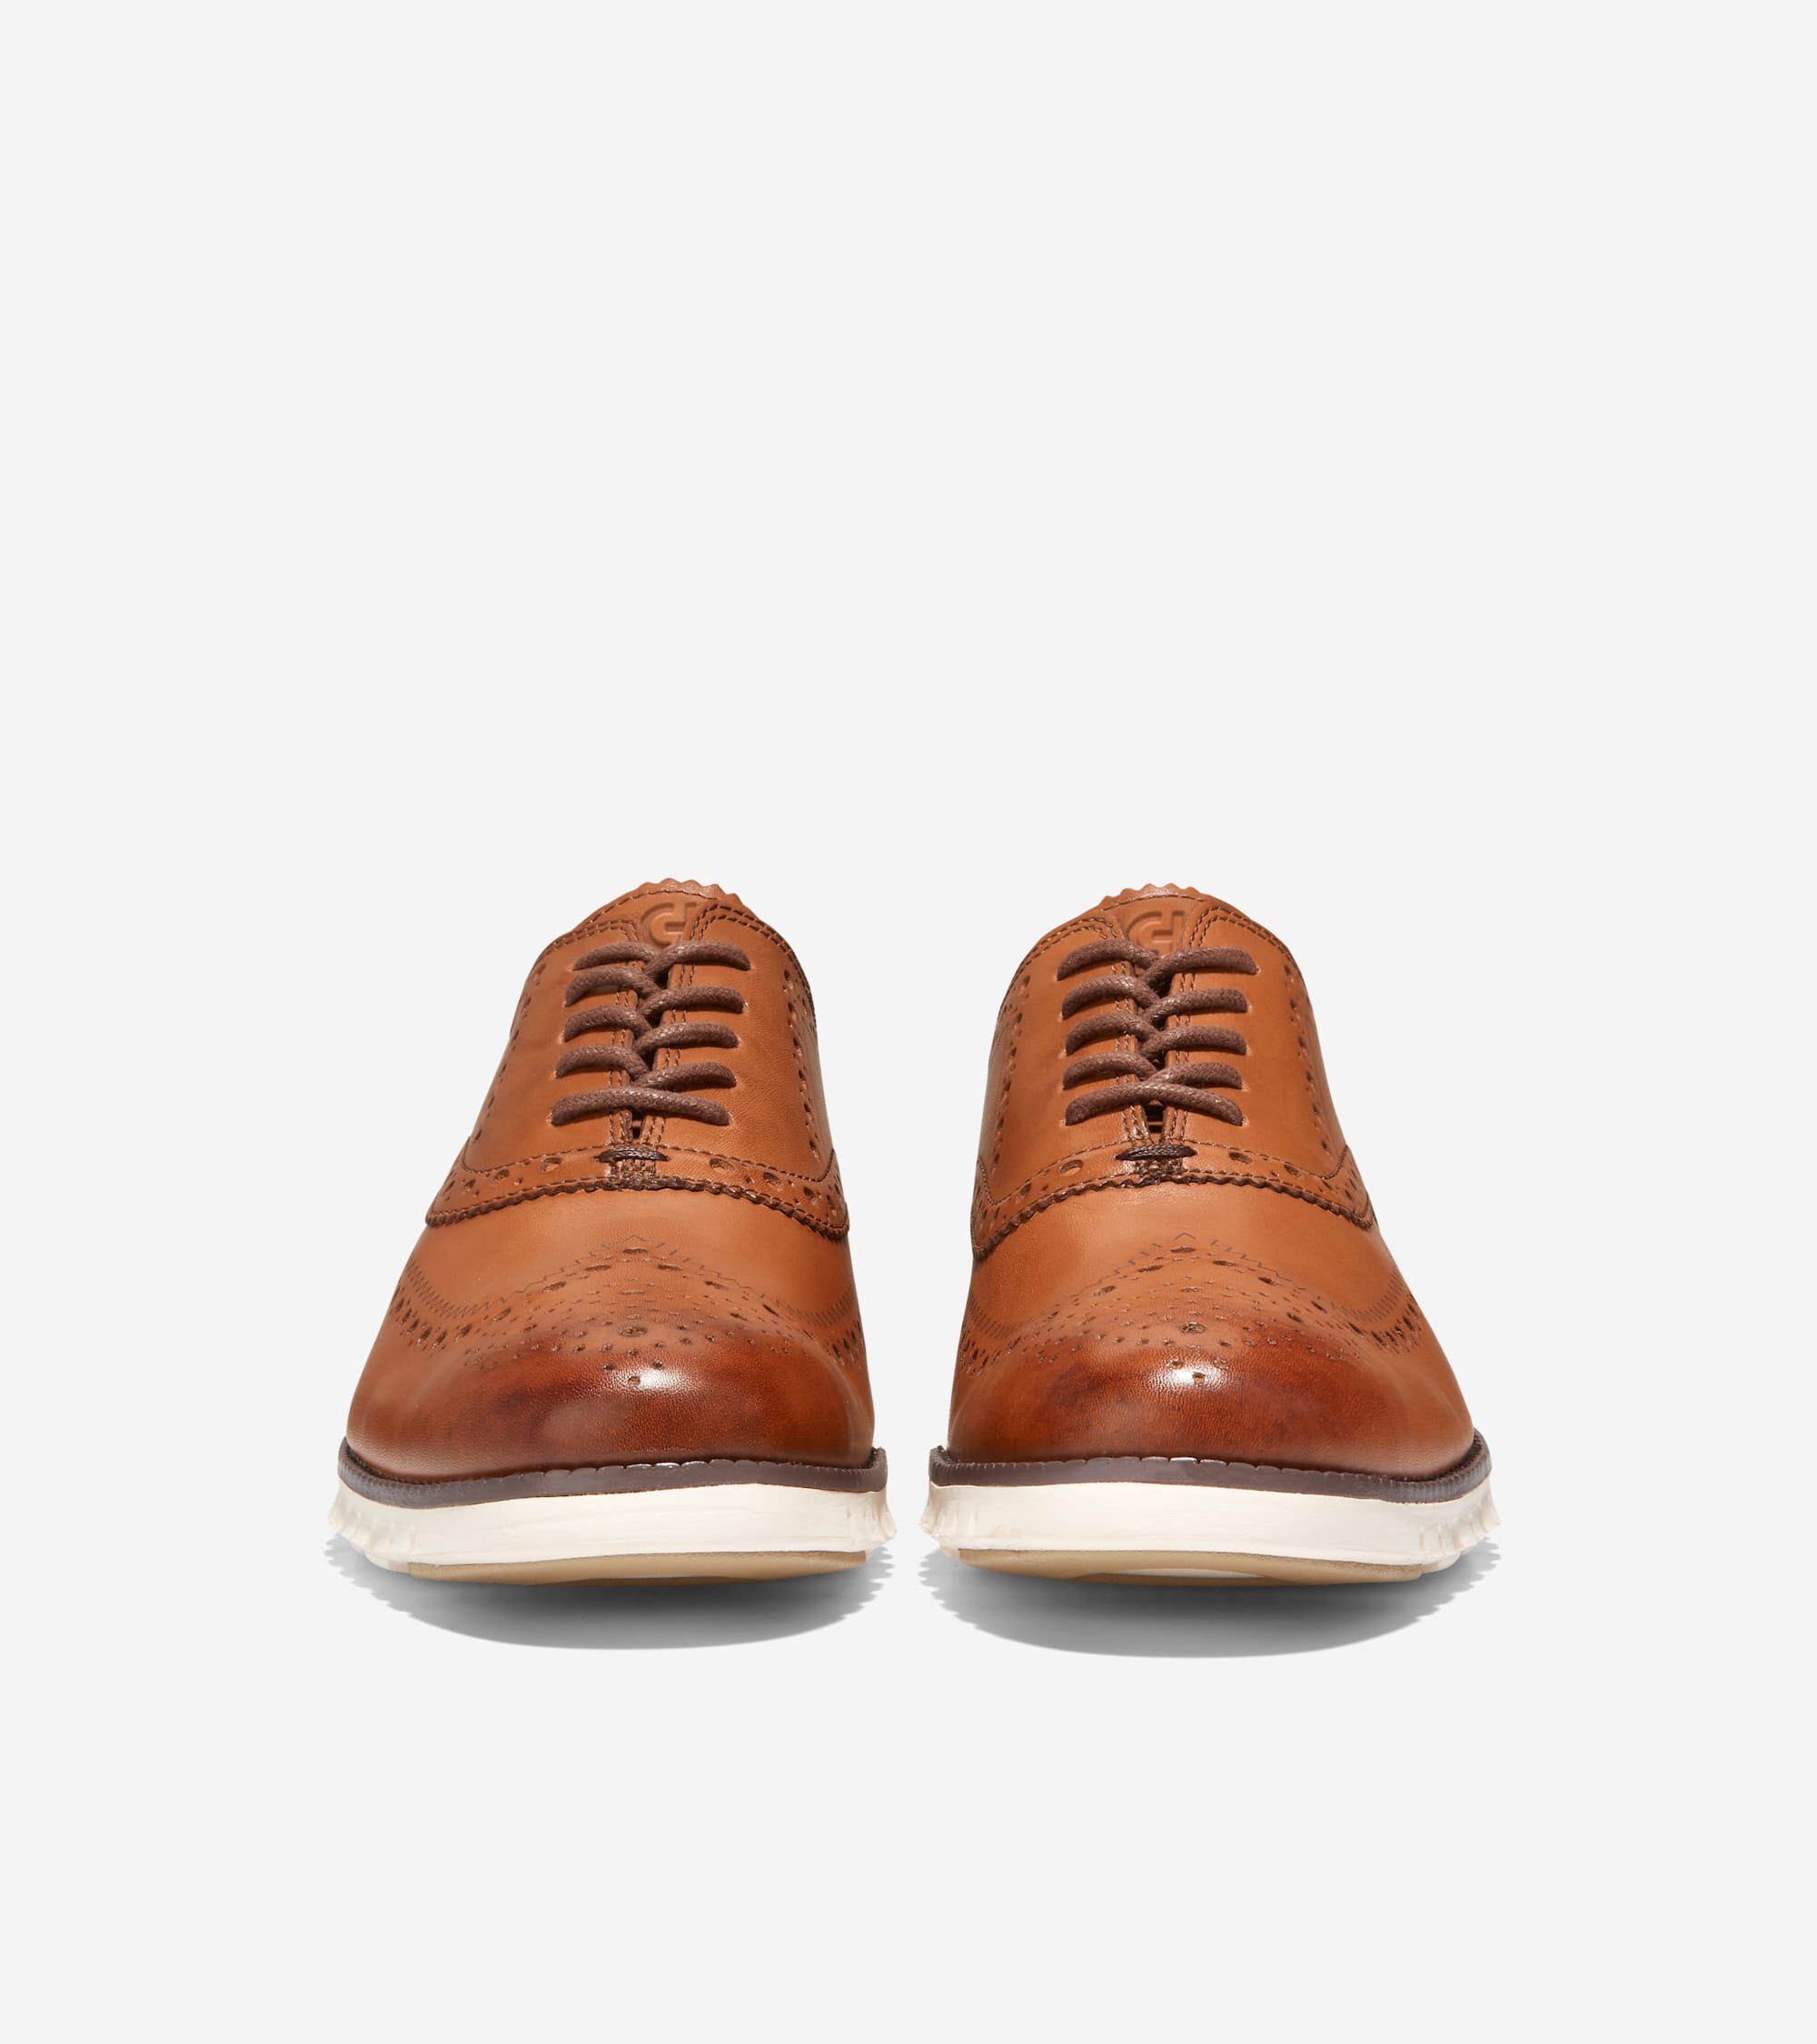 cole haan wedding shoes for sale, OFF 64%